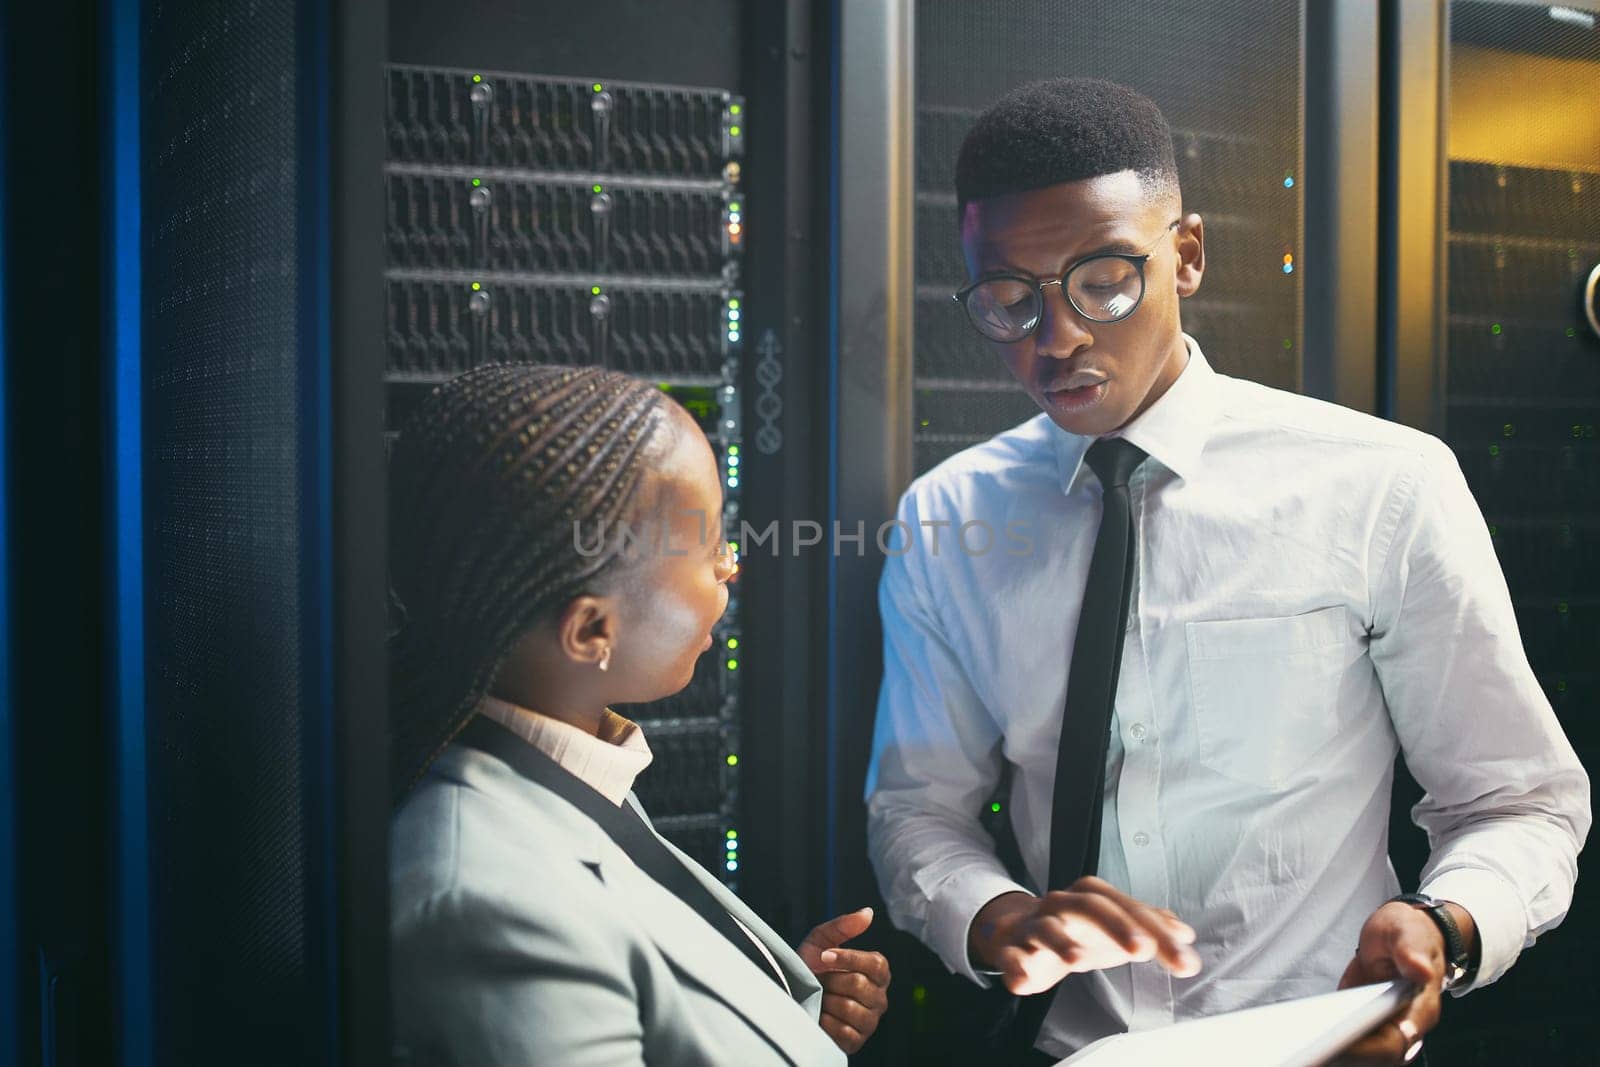 Were the only two who can solve technology issues. two young IT specialists standing in the server room and having a discussion while using a digital tablet